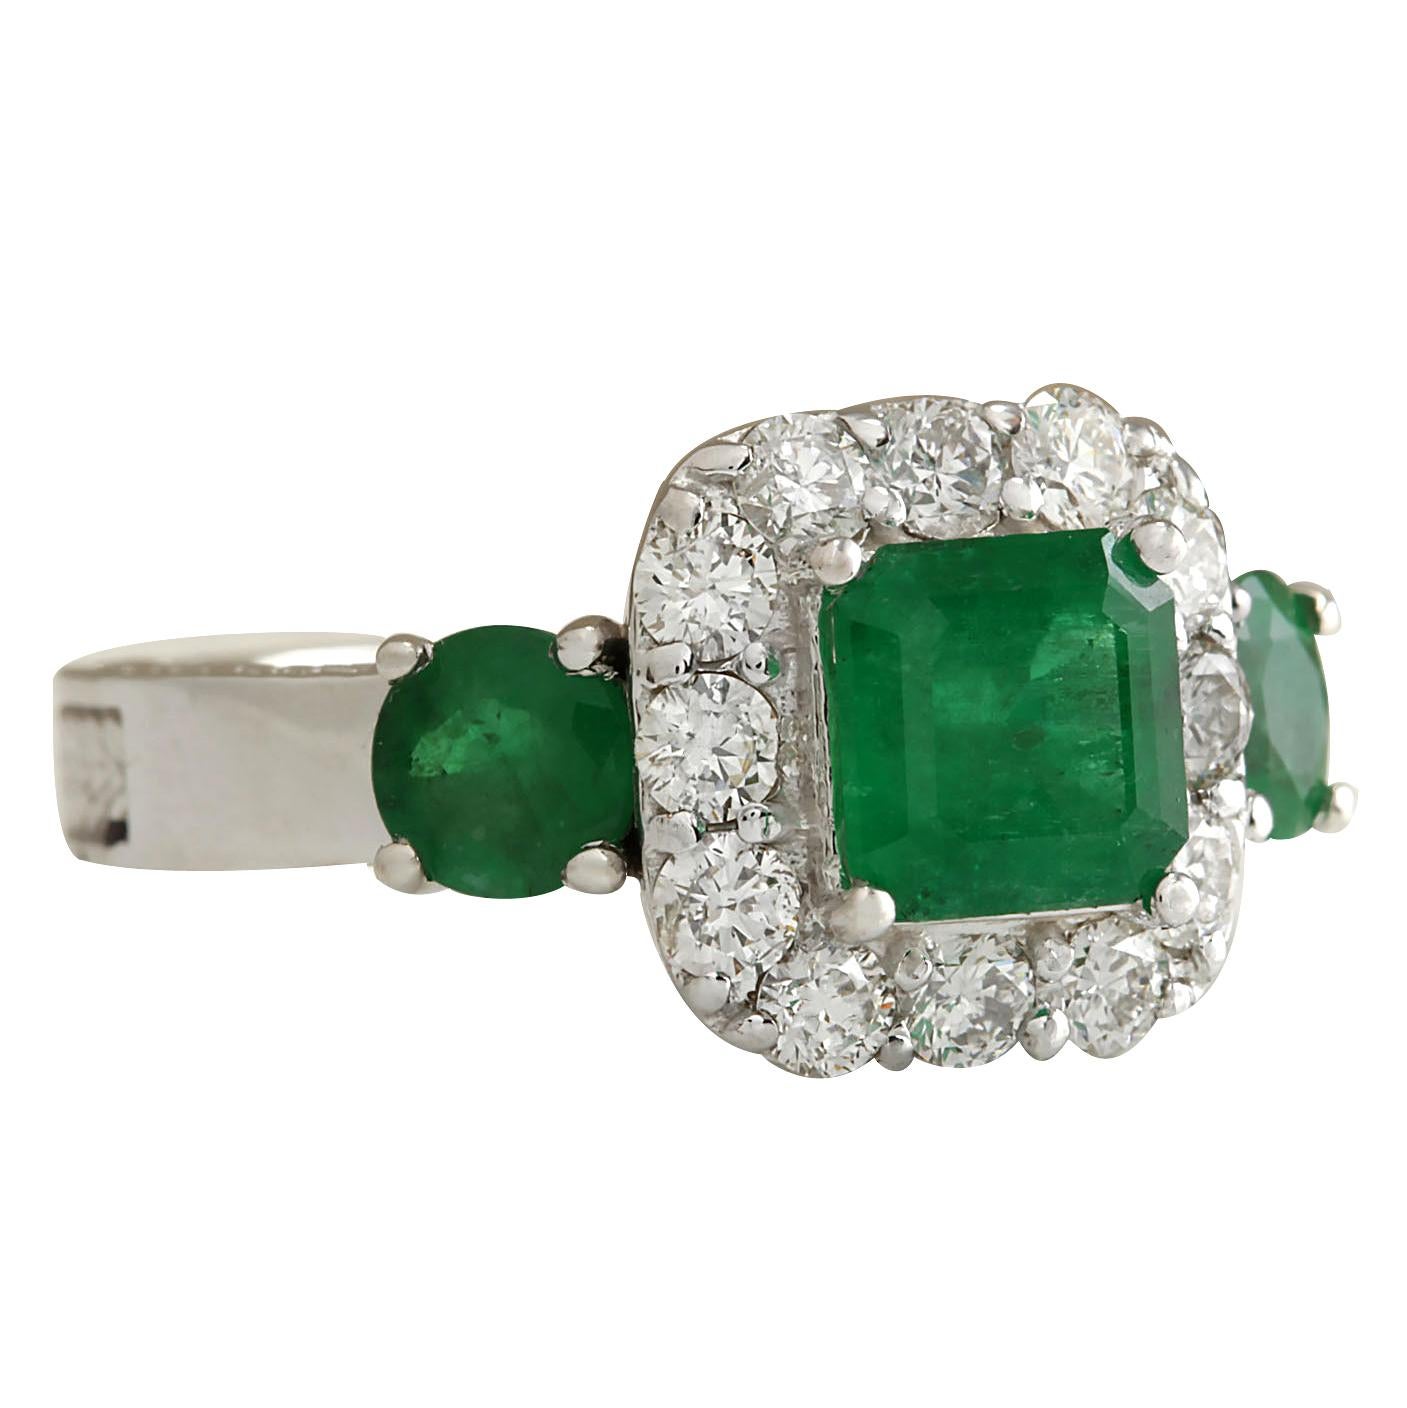 Stamped: 14K White Gold
Total Ring Weight: 7.4 Grams
 Total Natural Center Emerald Weight is 1.44 Carat (Measures: 6.50x6.50 mm)
Total Natural Side Emerald Weight is 0.90 Carat
Total Natural Diamond Weight is 0.90 Carat
Color: F-G, Clarity: